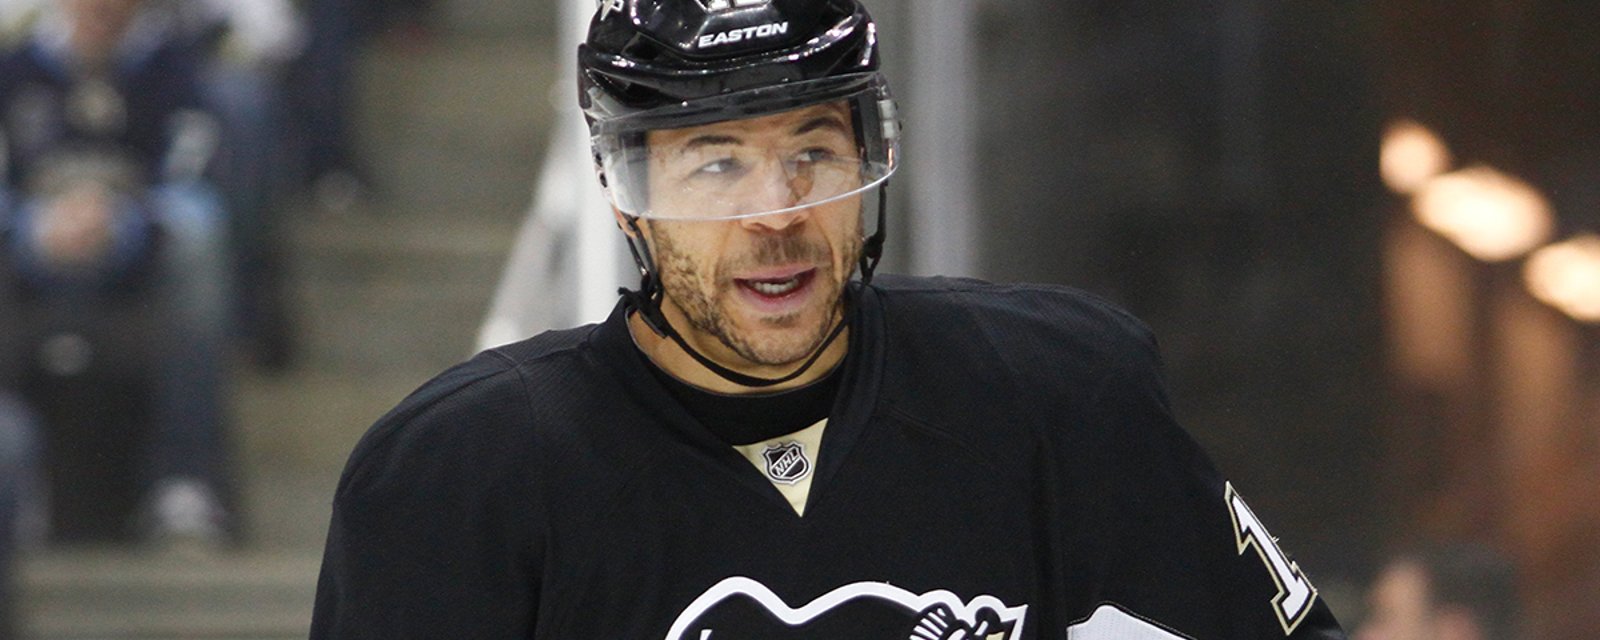 Rumor: Iginla linked to two Eastern Conference contenders